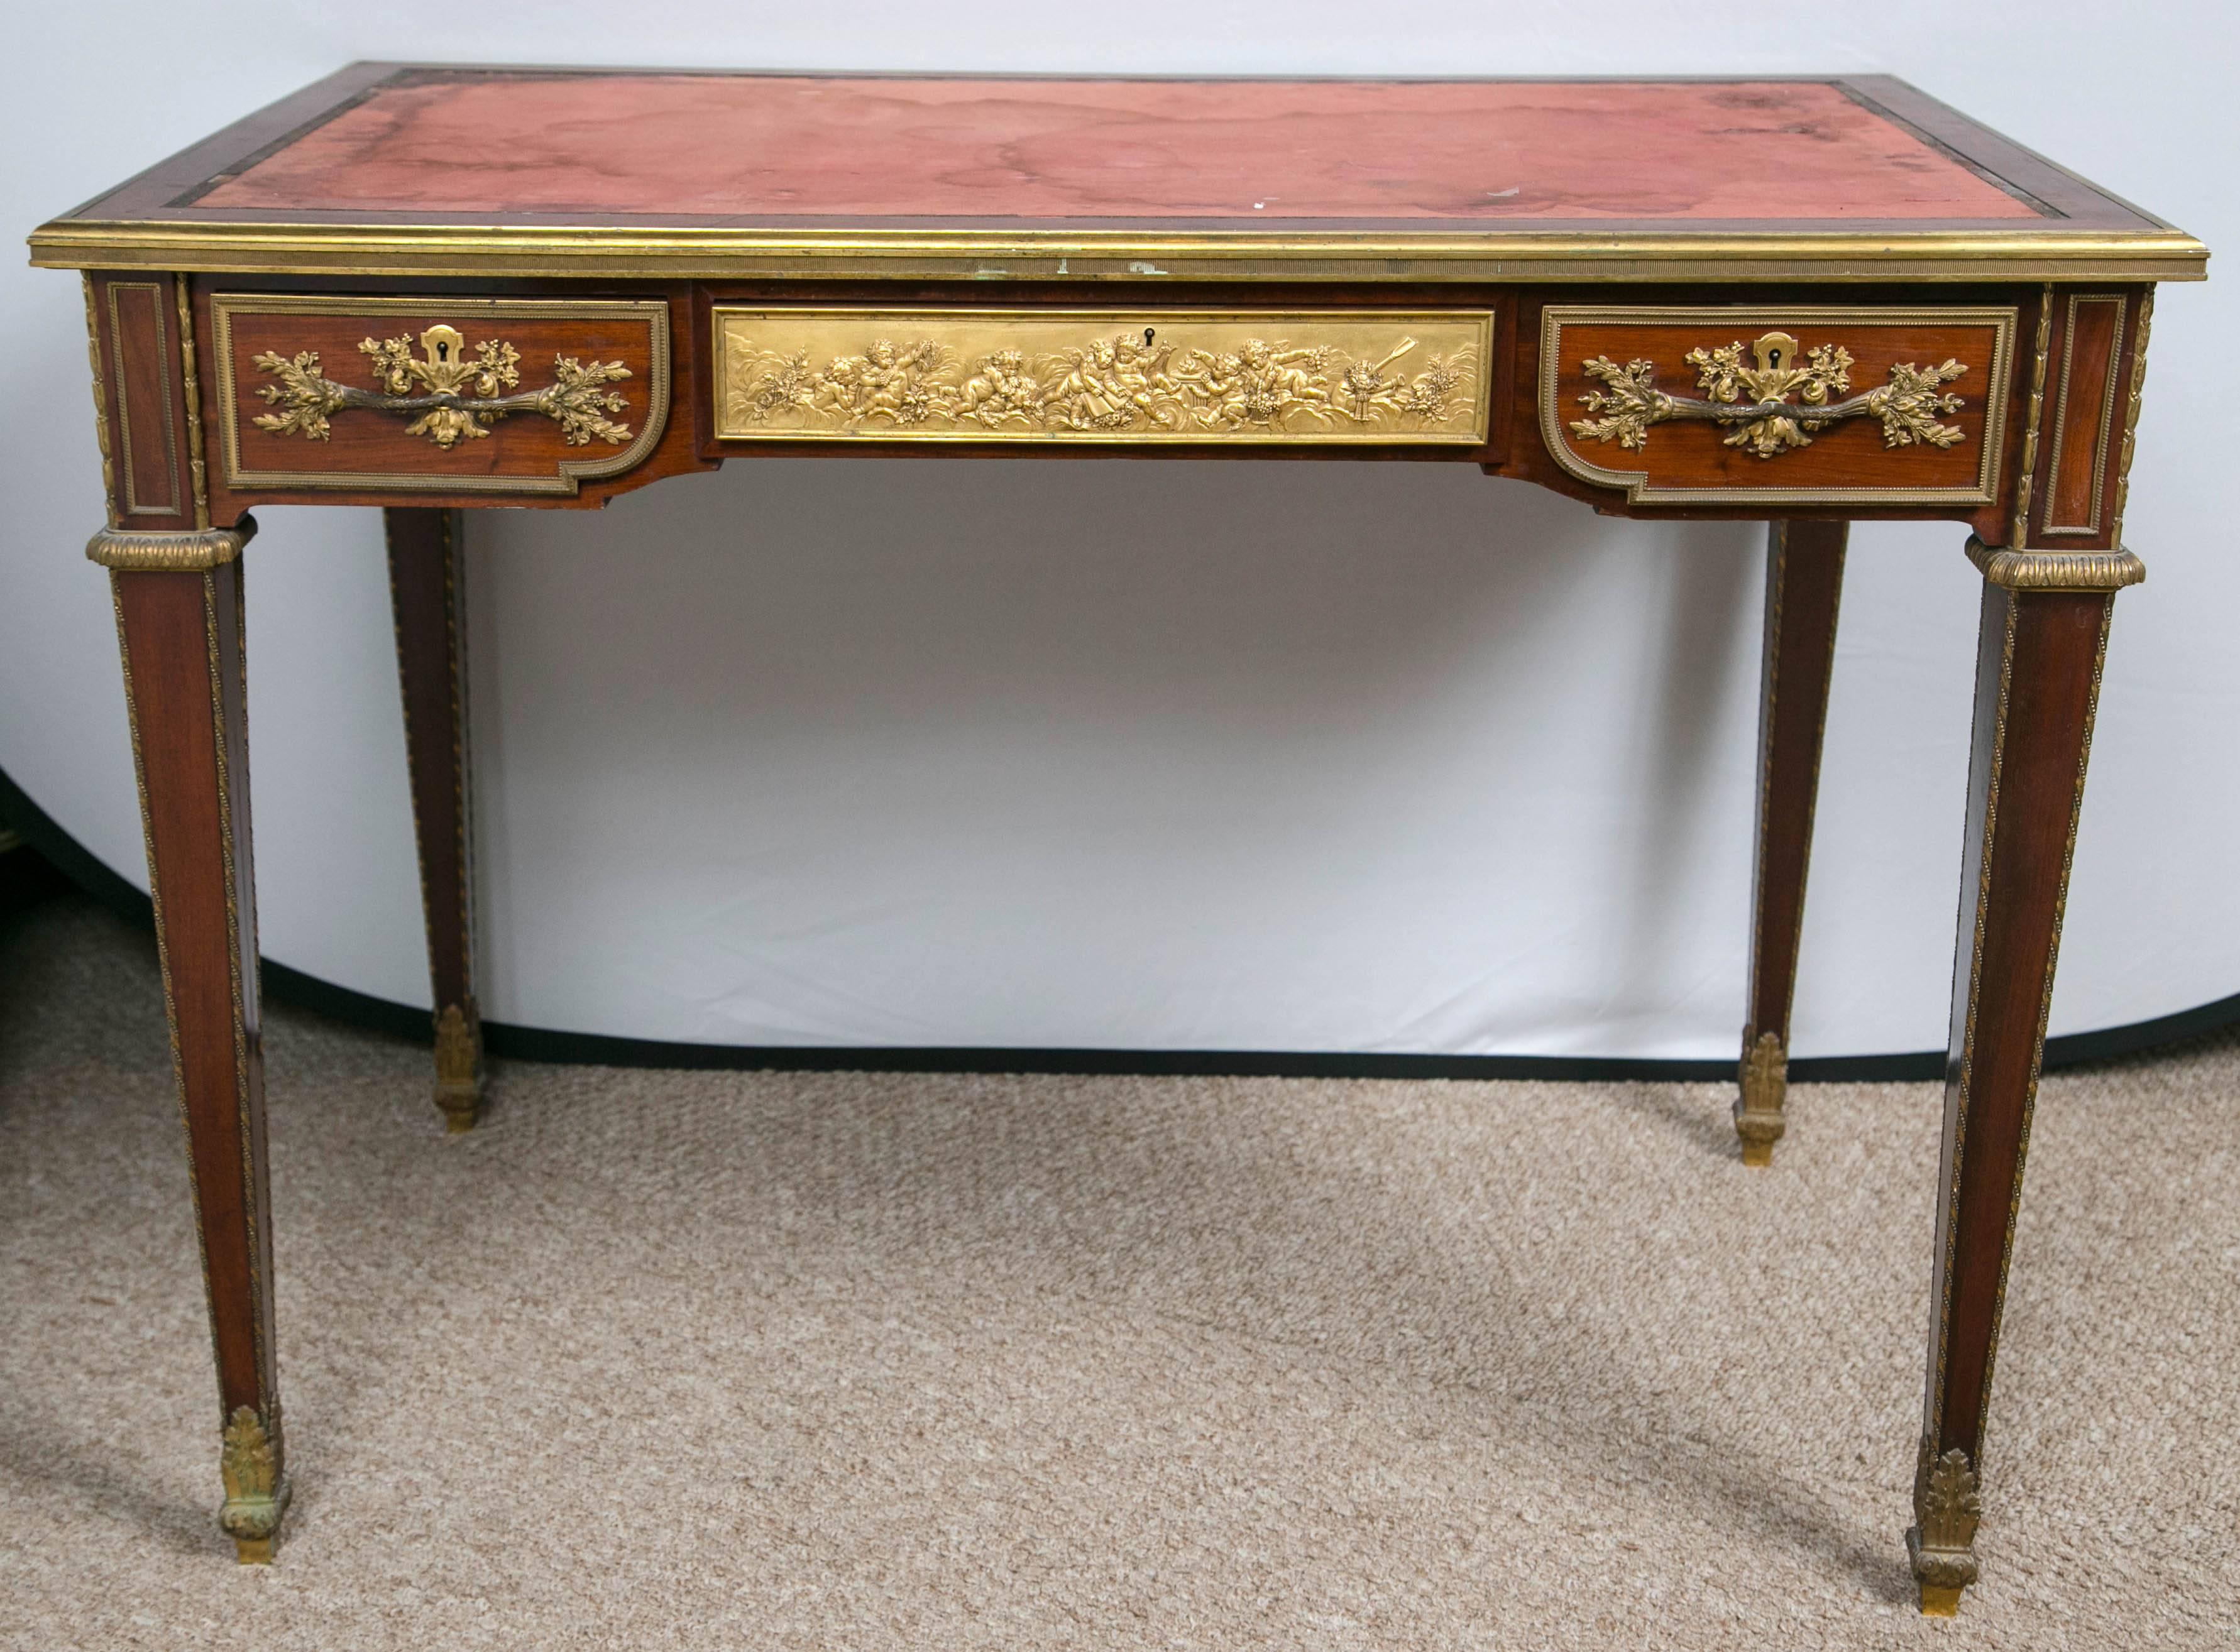 A French ormolu-mounted mahogany bureau plat by Paul Sormani. This finely detailed and signed late 19th century bureau plat has a fabric lined top above three frieze drawers, with false drawers to reverse, the lock plate signed P. Sormani Paris/10r